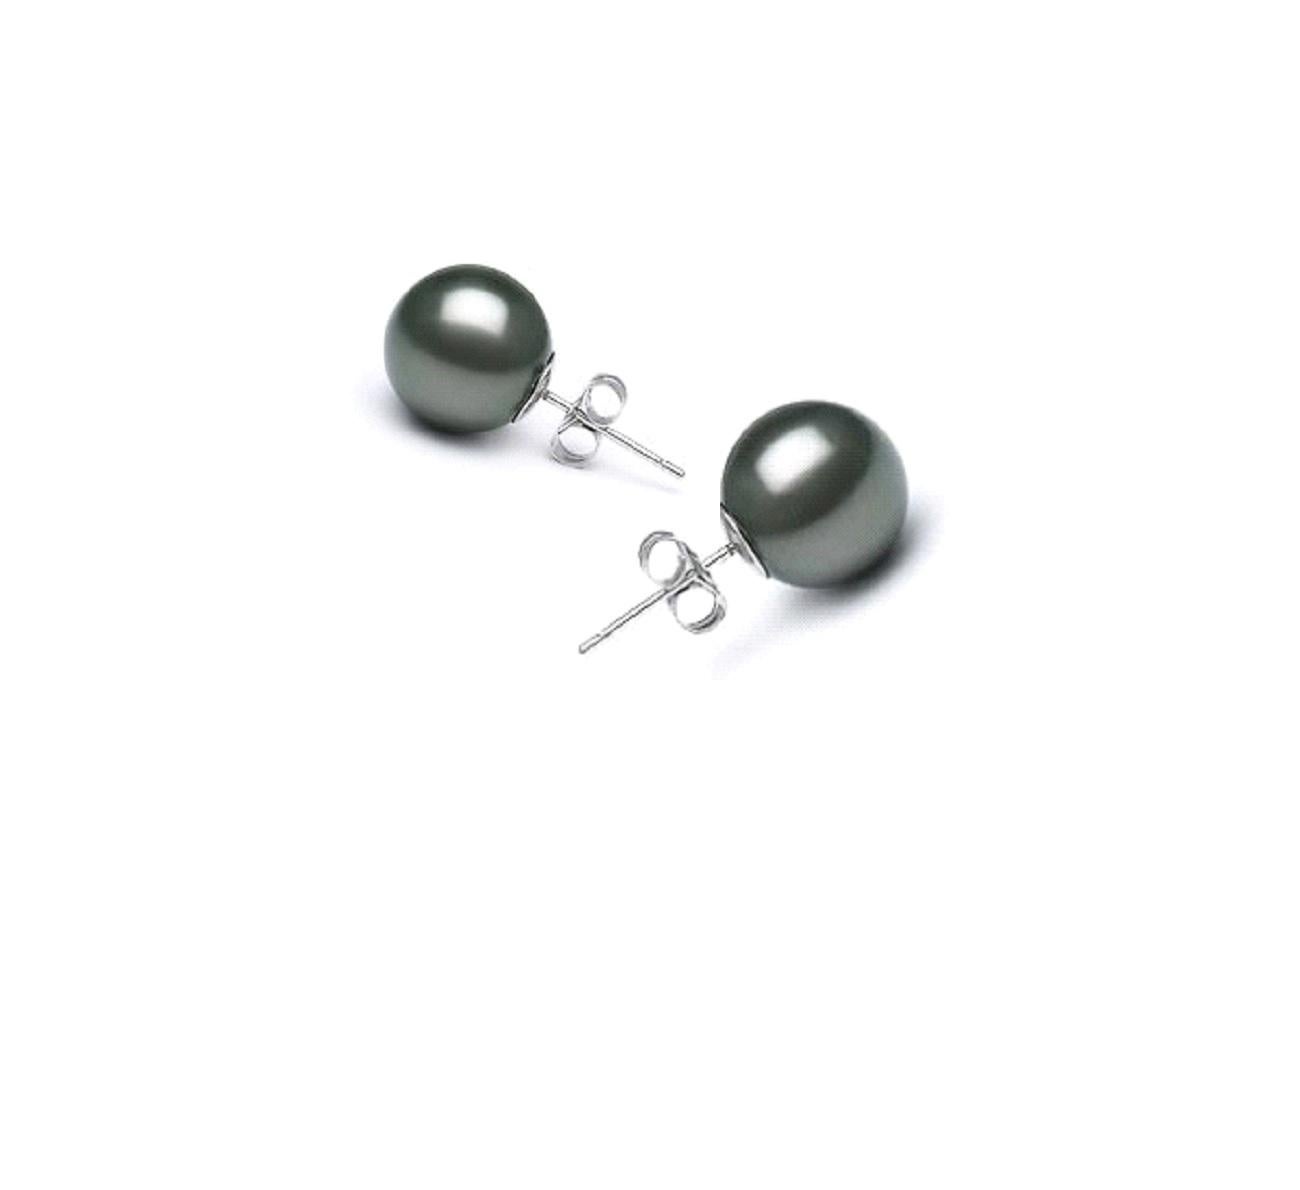 14k White Gold High Quality AAA Genuine Tahitian Pearls Stud Earrings
A Perfect Gift For your Loved Ones!
Simplicity and understated elegance have never made such a perfect combination. A beautiful pair of Tahitian pearls set on 14K white gold stud